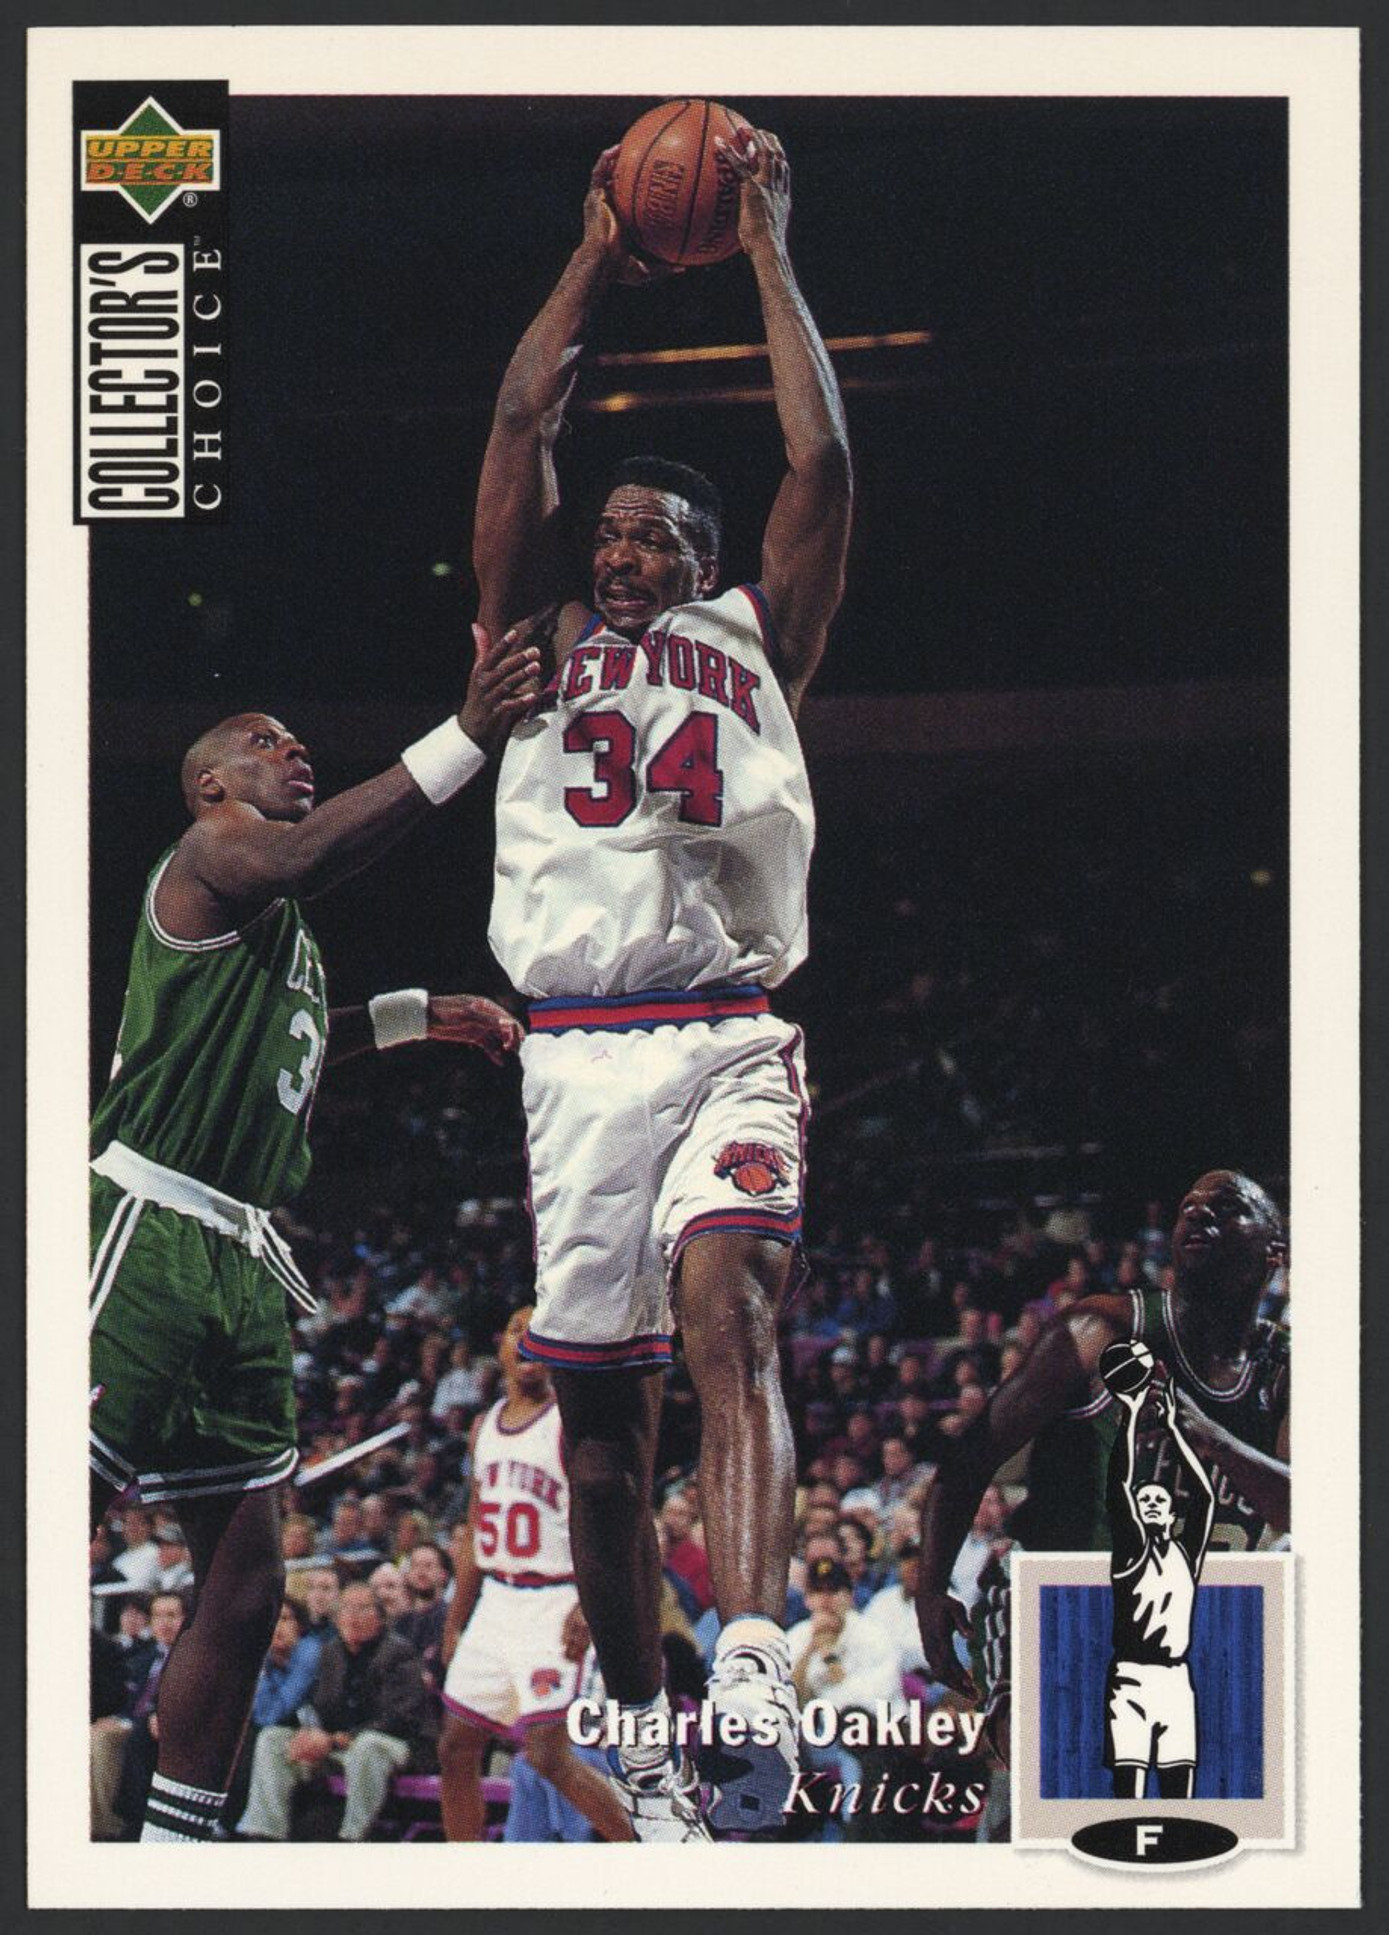 1994-95 Upper Deck Collector's Choice #97 Charles Oakley Knicks EX